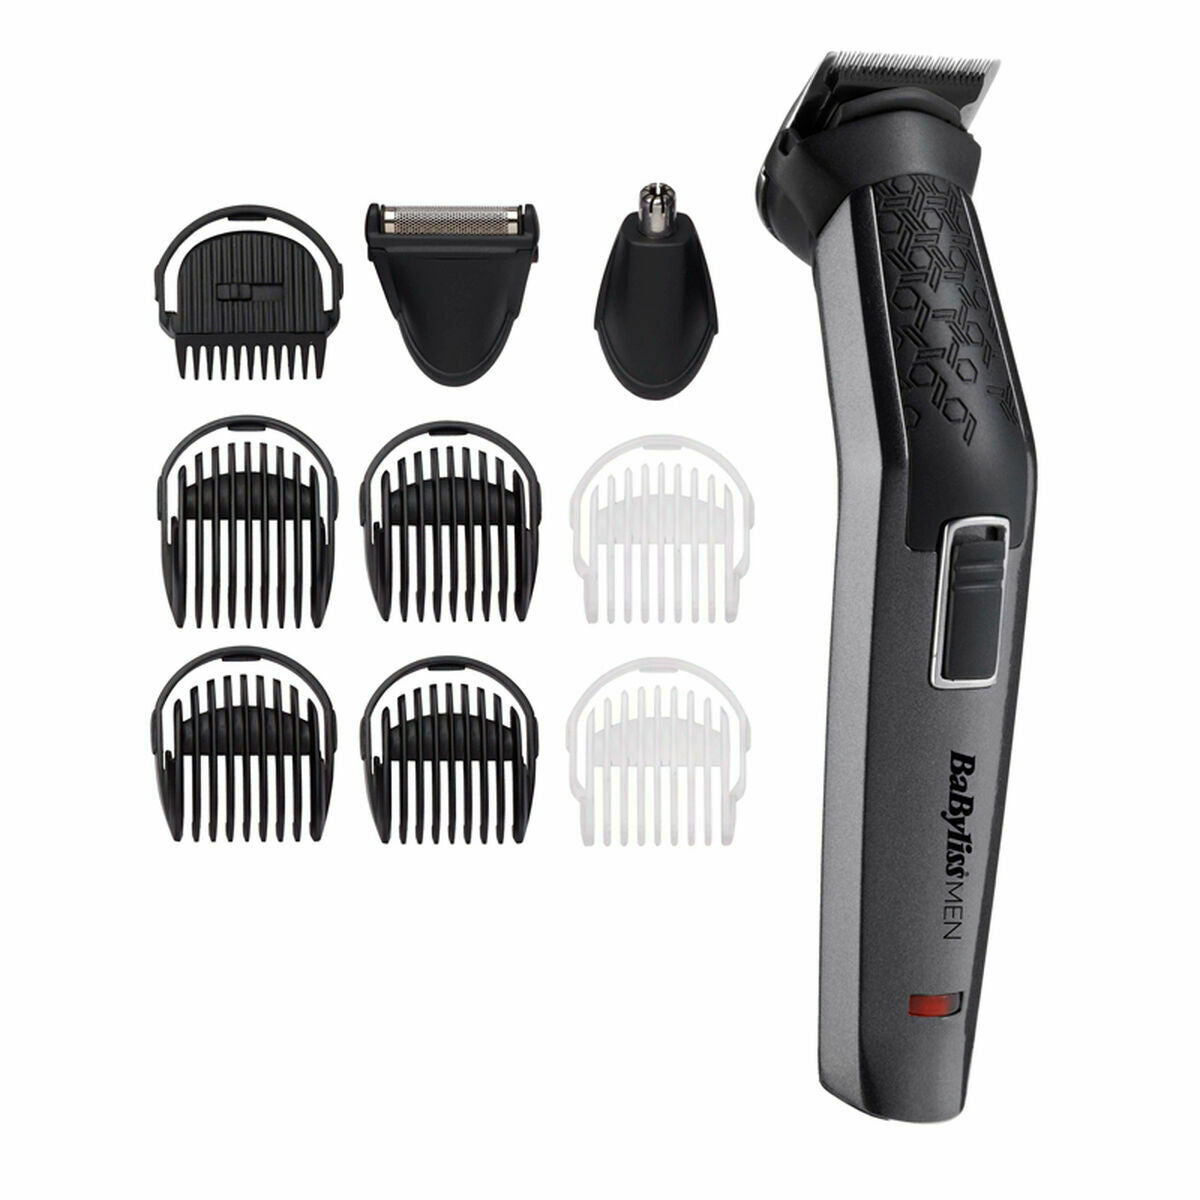 Hair clippers/Shaver Babyliss MT727E Grey-0